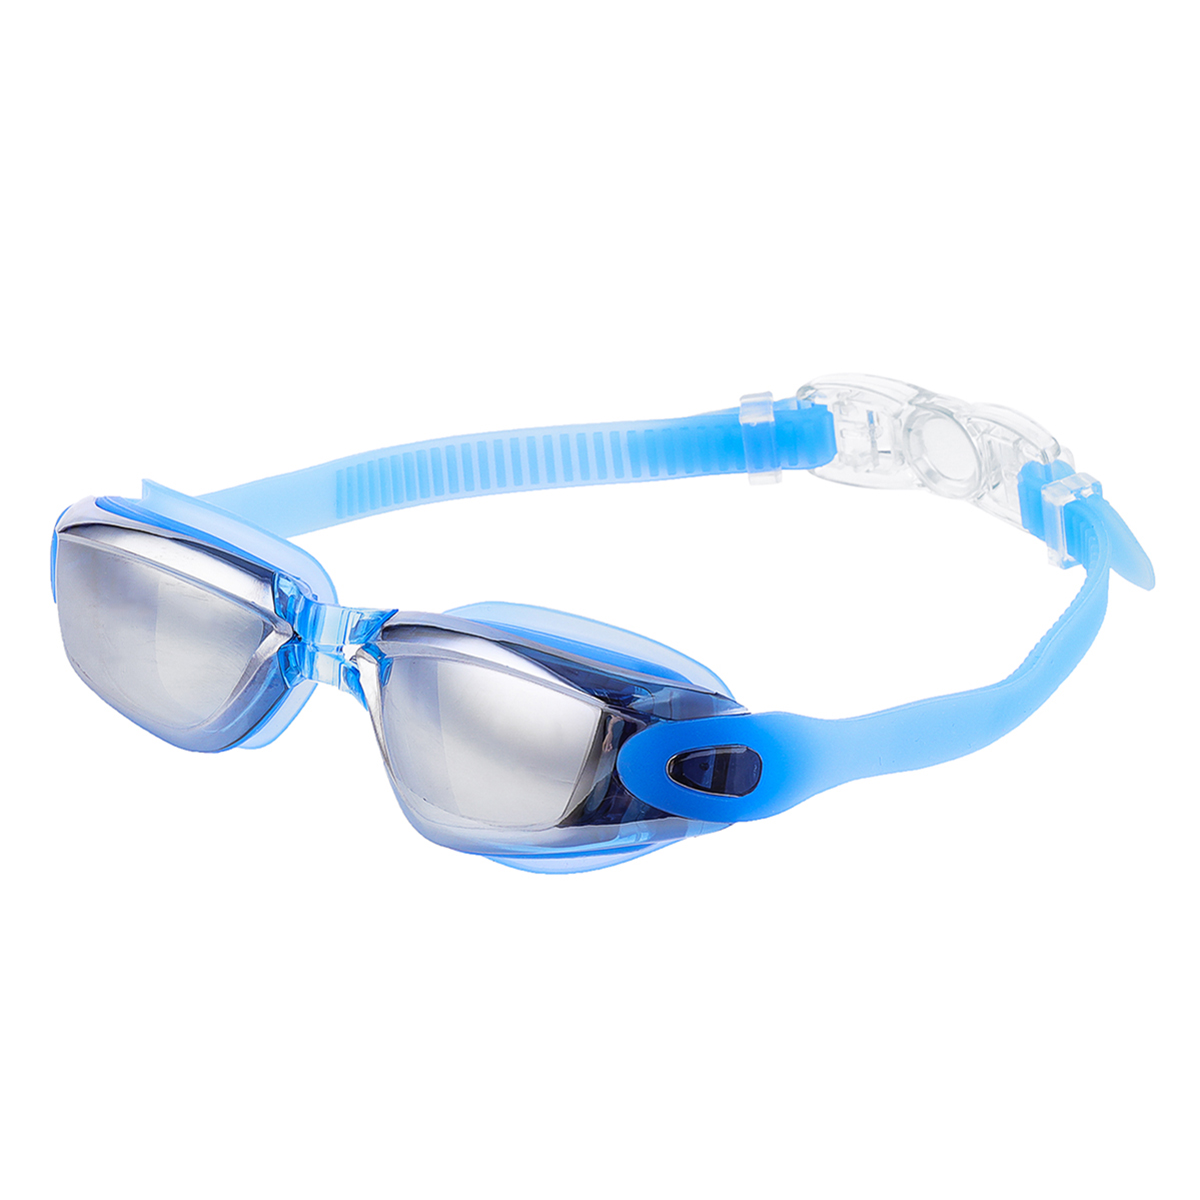 2Pair-Swimming-Goggles-with-Earplug-Nose-Rest-Transparent-Anti-UV-Anti-Fog-Protection-Goggles-for-Ad-1884483-8